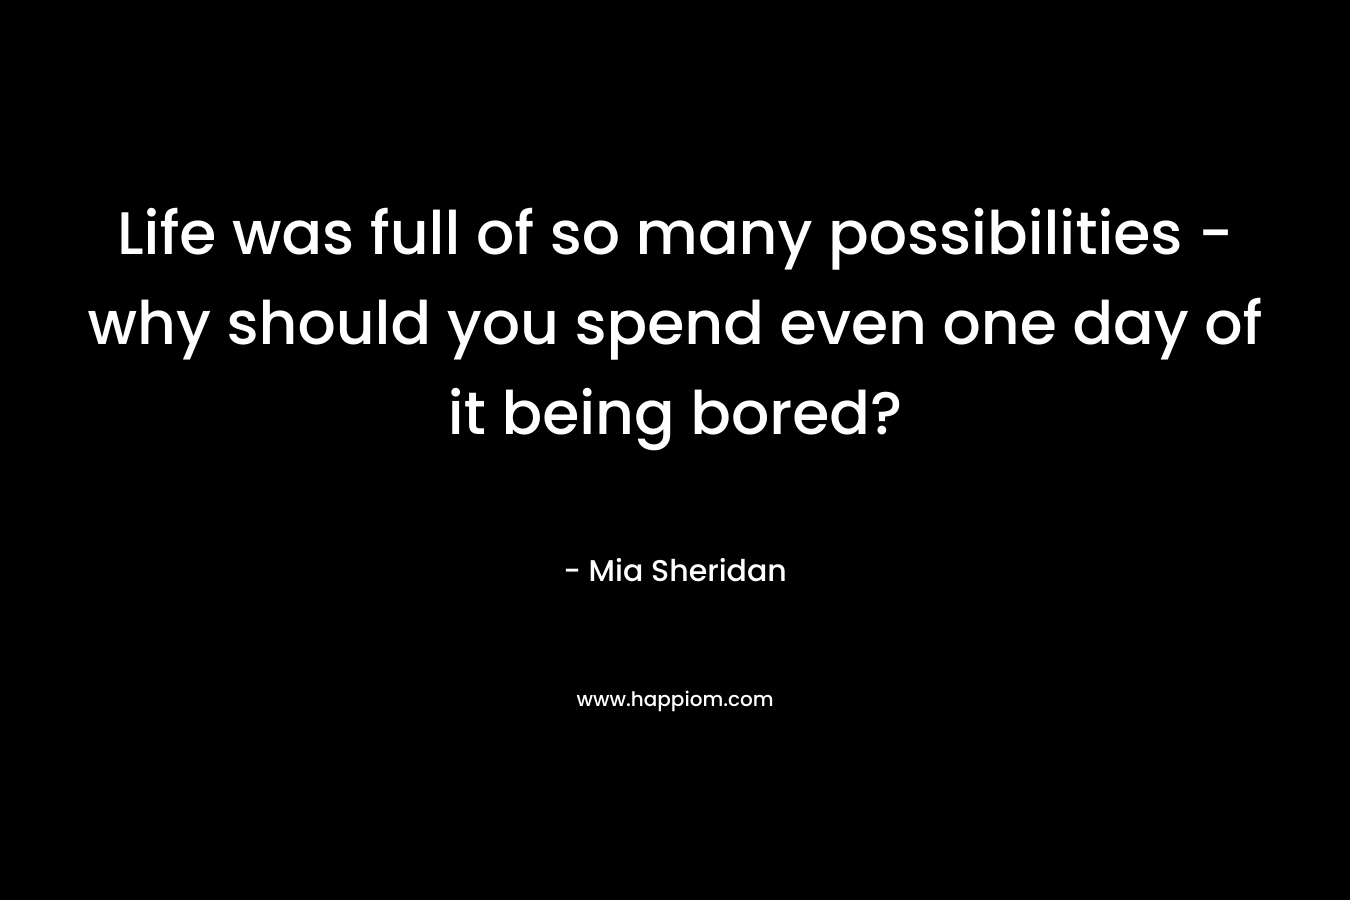 Life was full of so many possibilities - why should you spend even one day of it being bored?